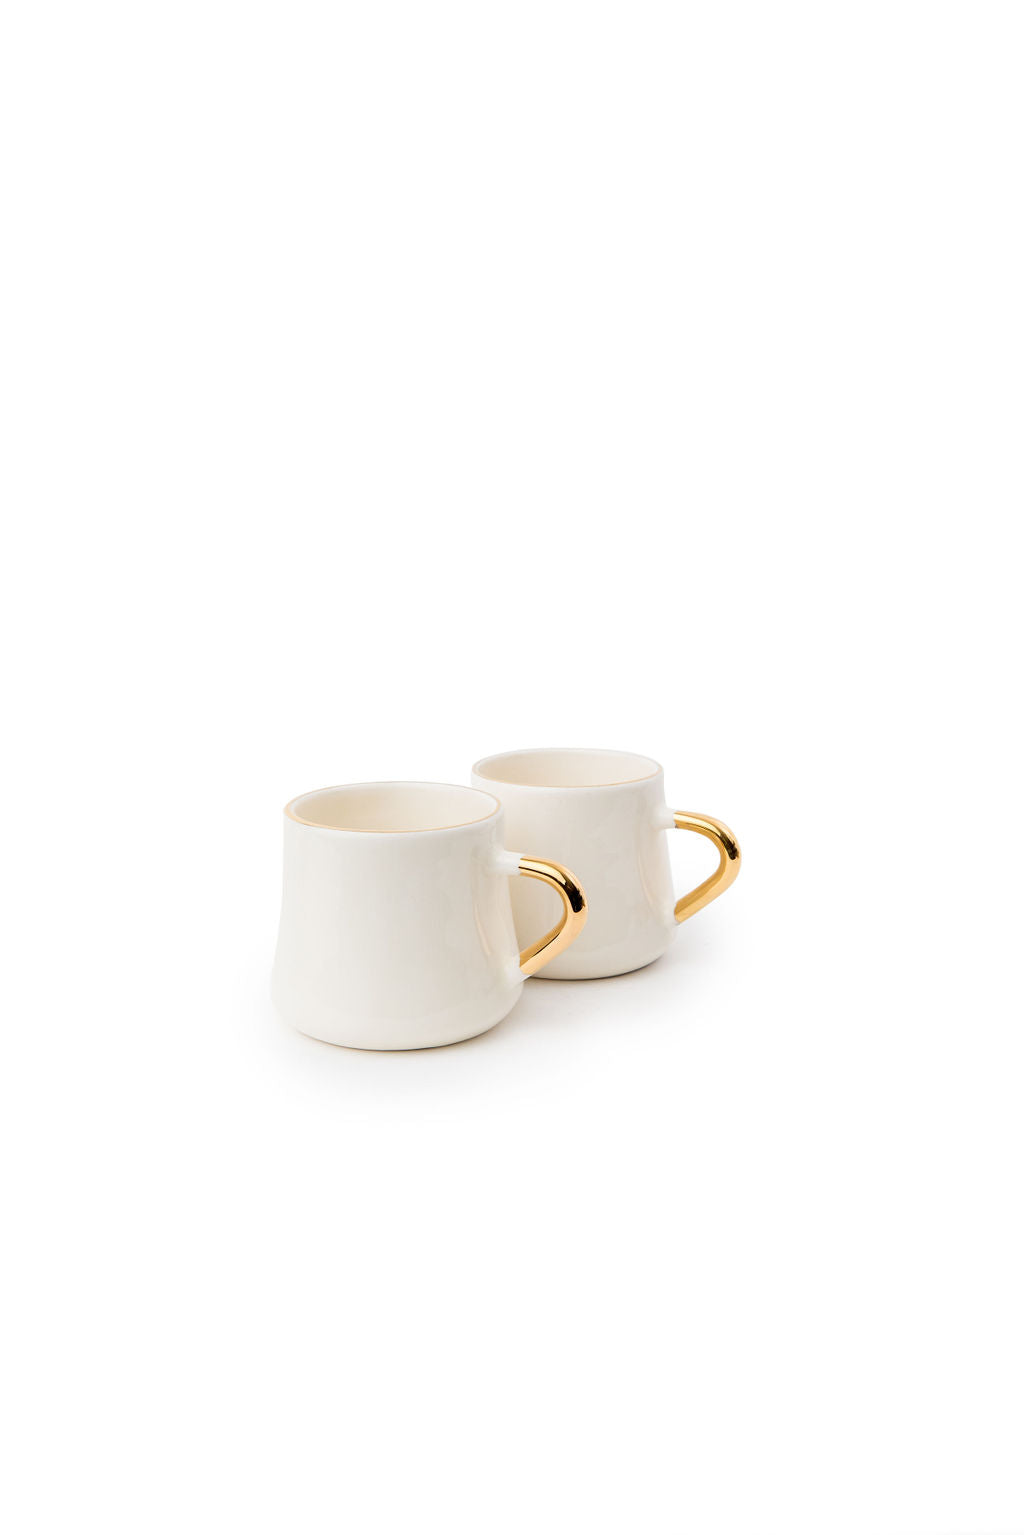 White And Gold Tea Cup